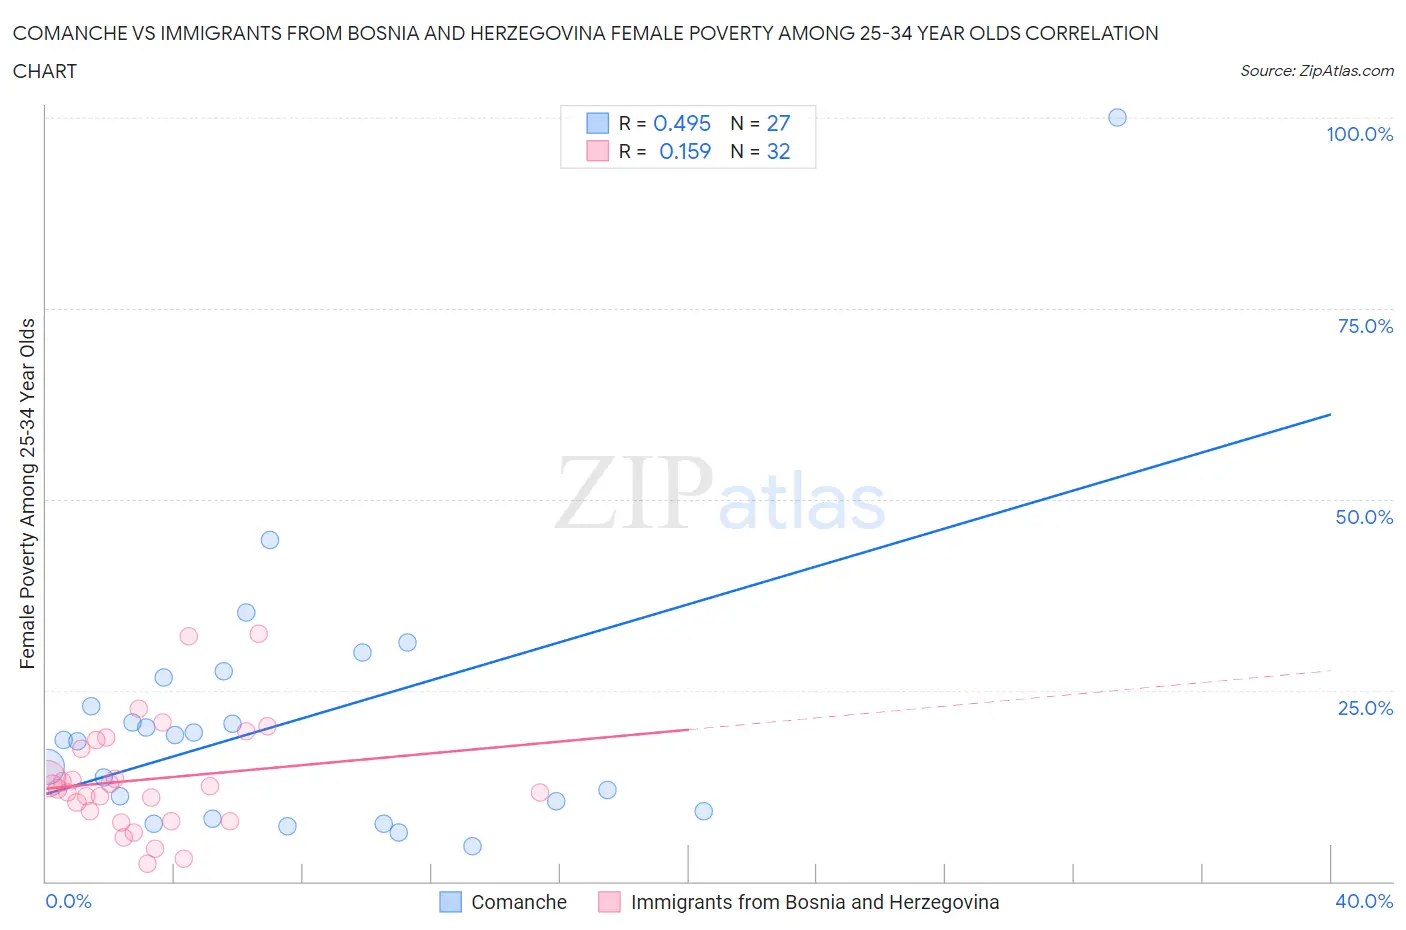 Comanche vs Immigrants from Bosnia and Herzegovina Female Poverty Among 25-34 Year Olds